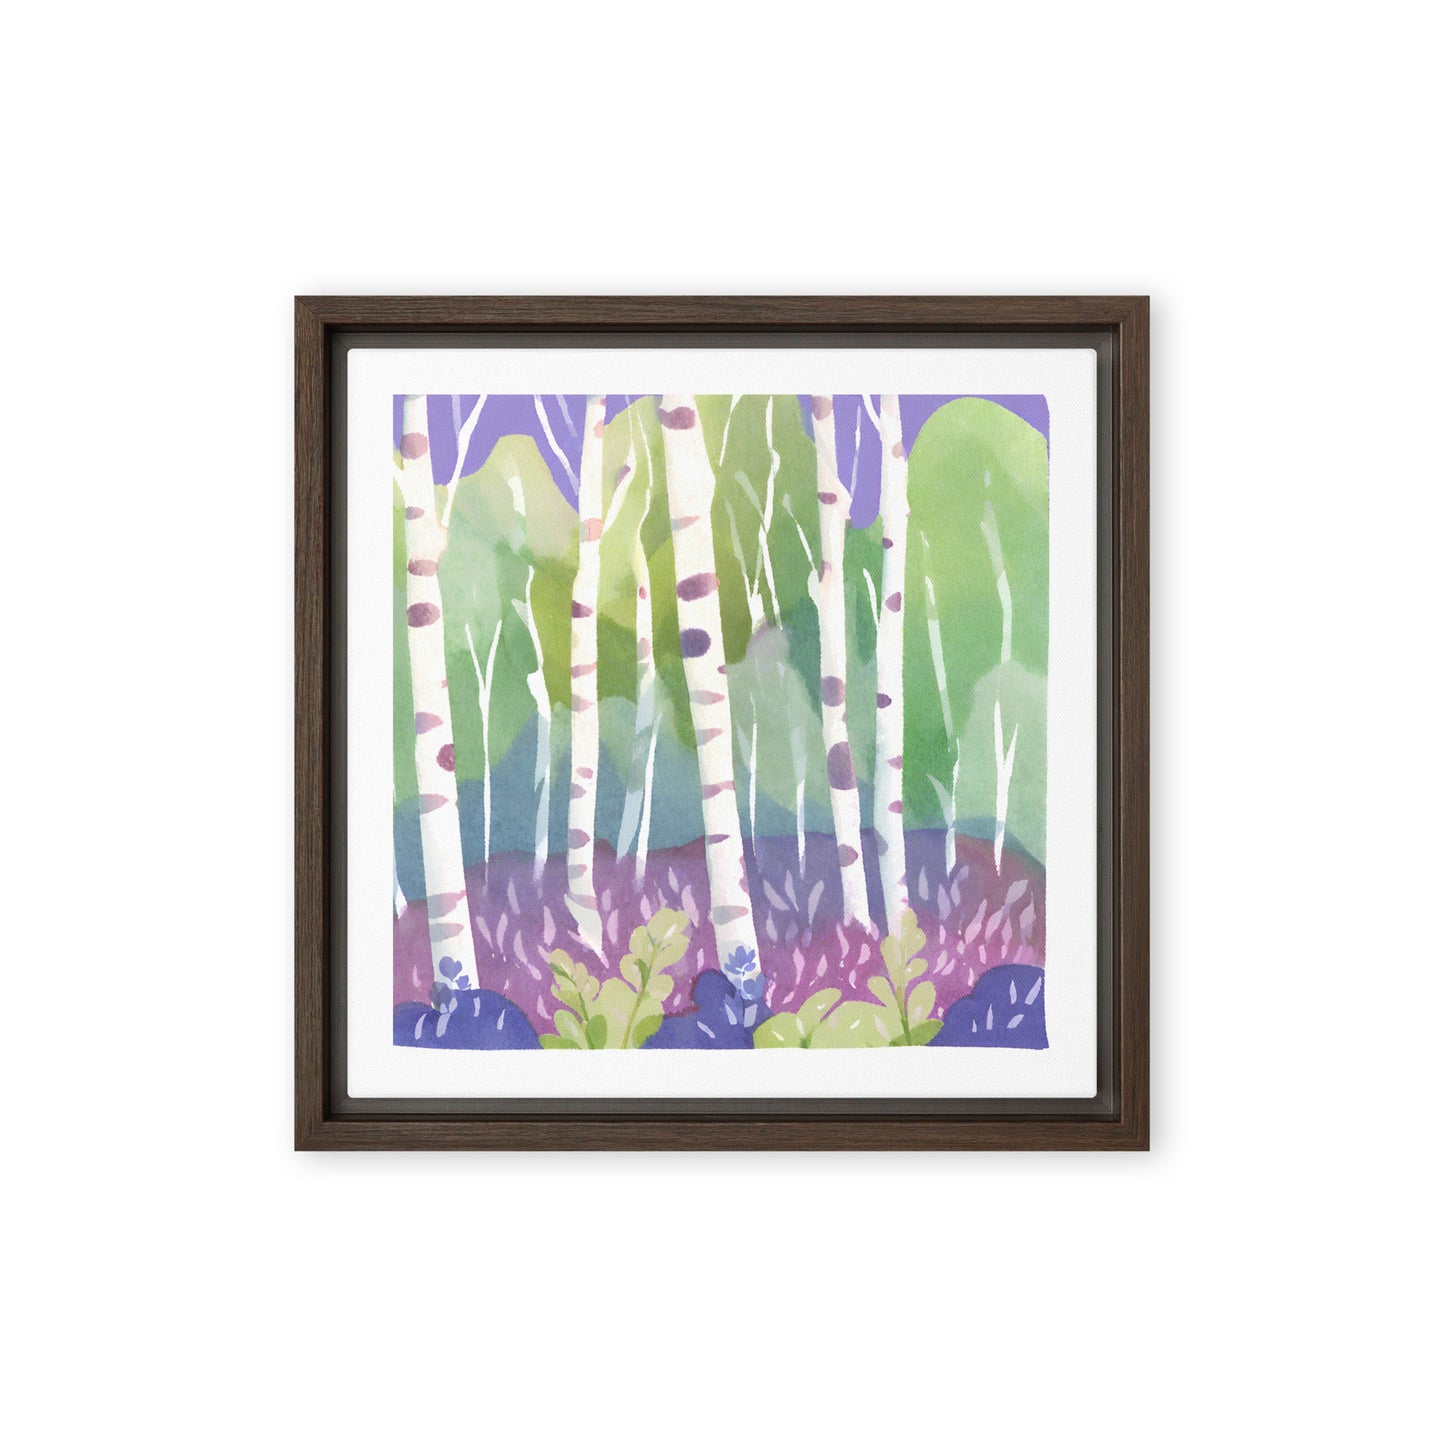 Birch and blueberries meeting - Framed canvas